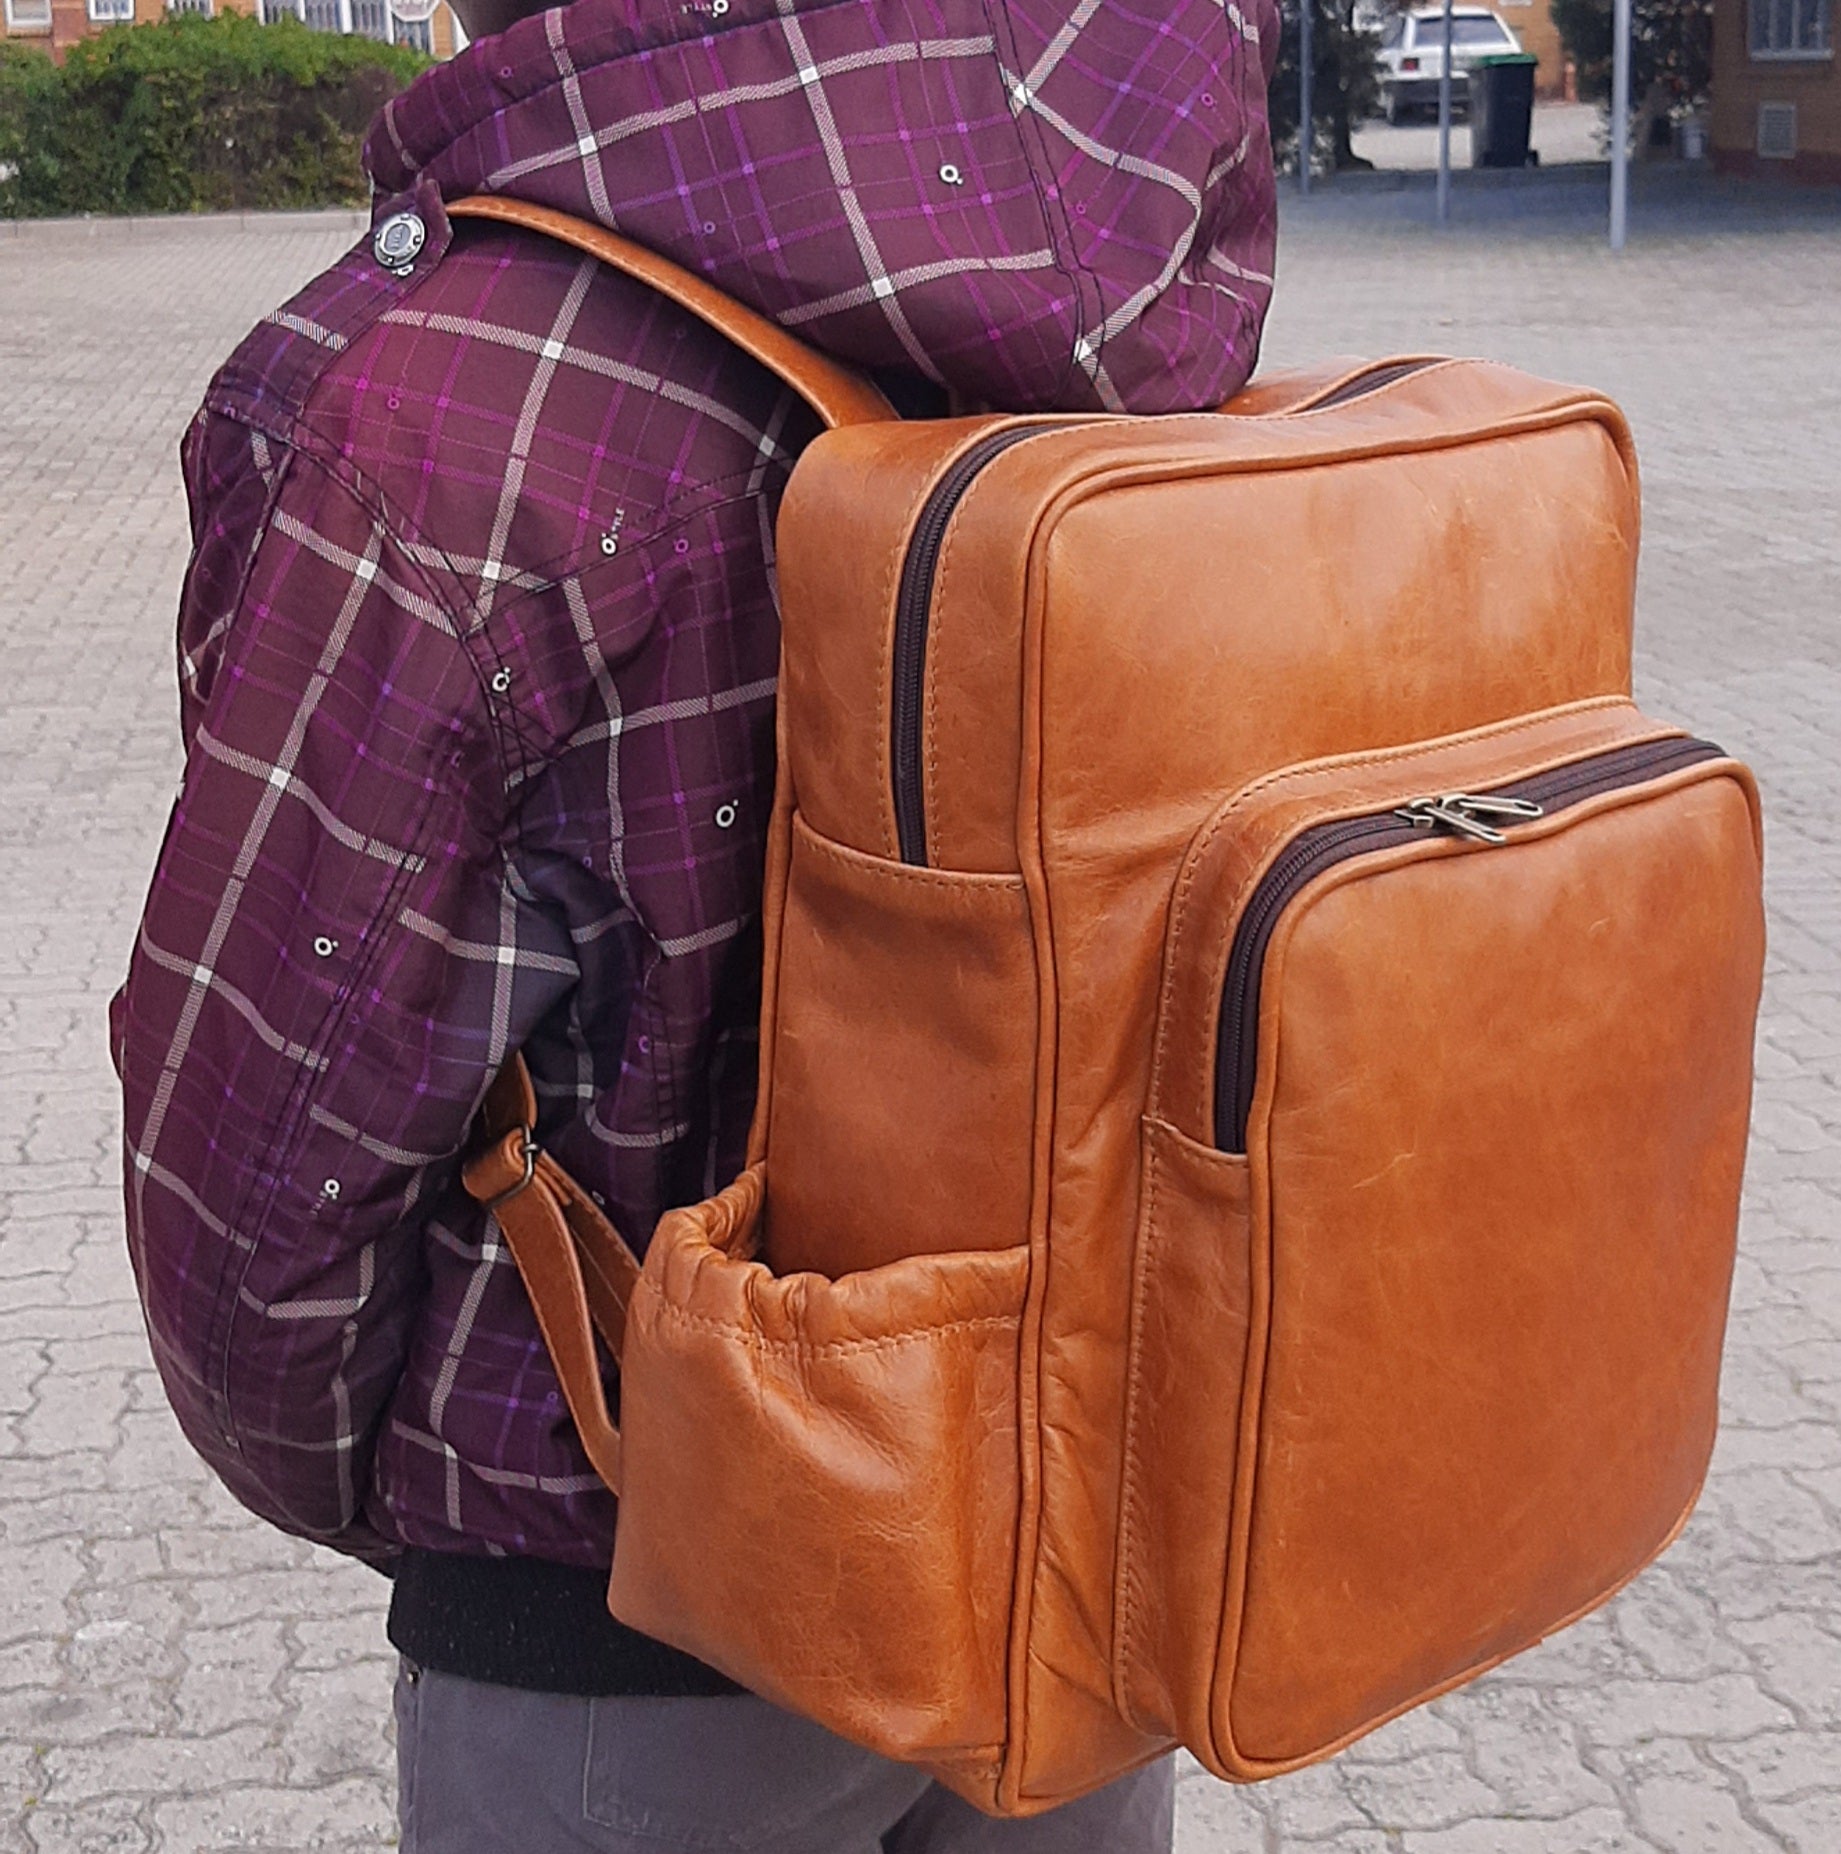 A boy carrying Everyday Leather Backpacks XL in light tan colour from Cape Masai Leather 